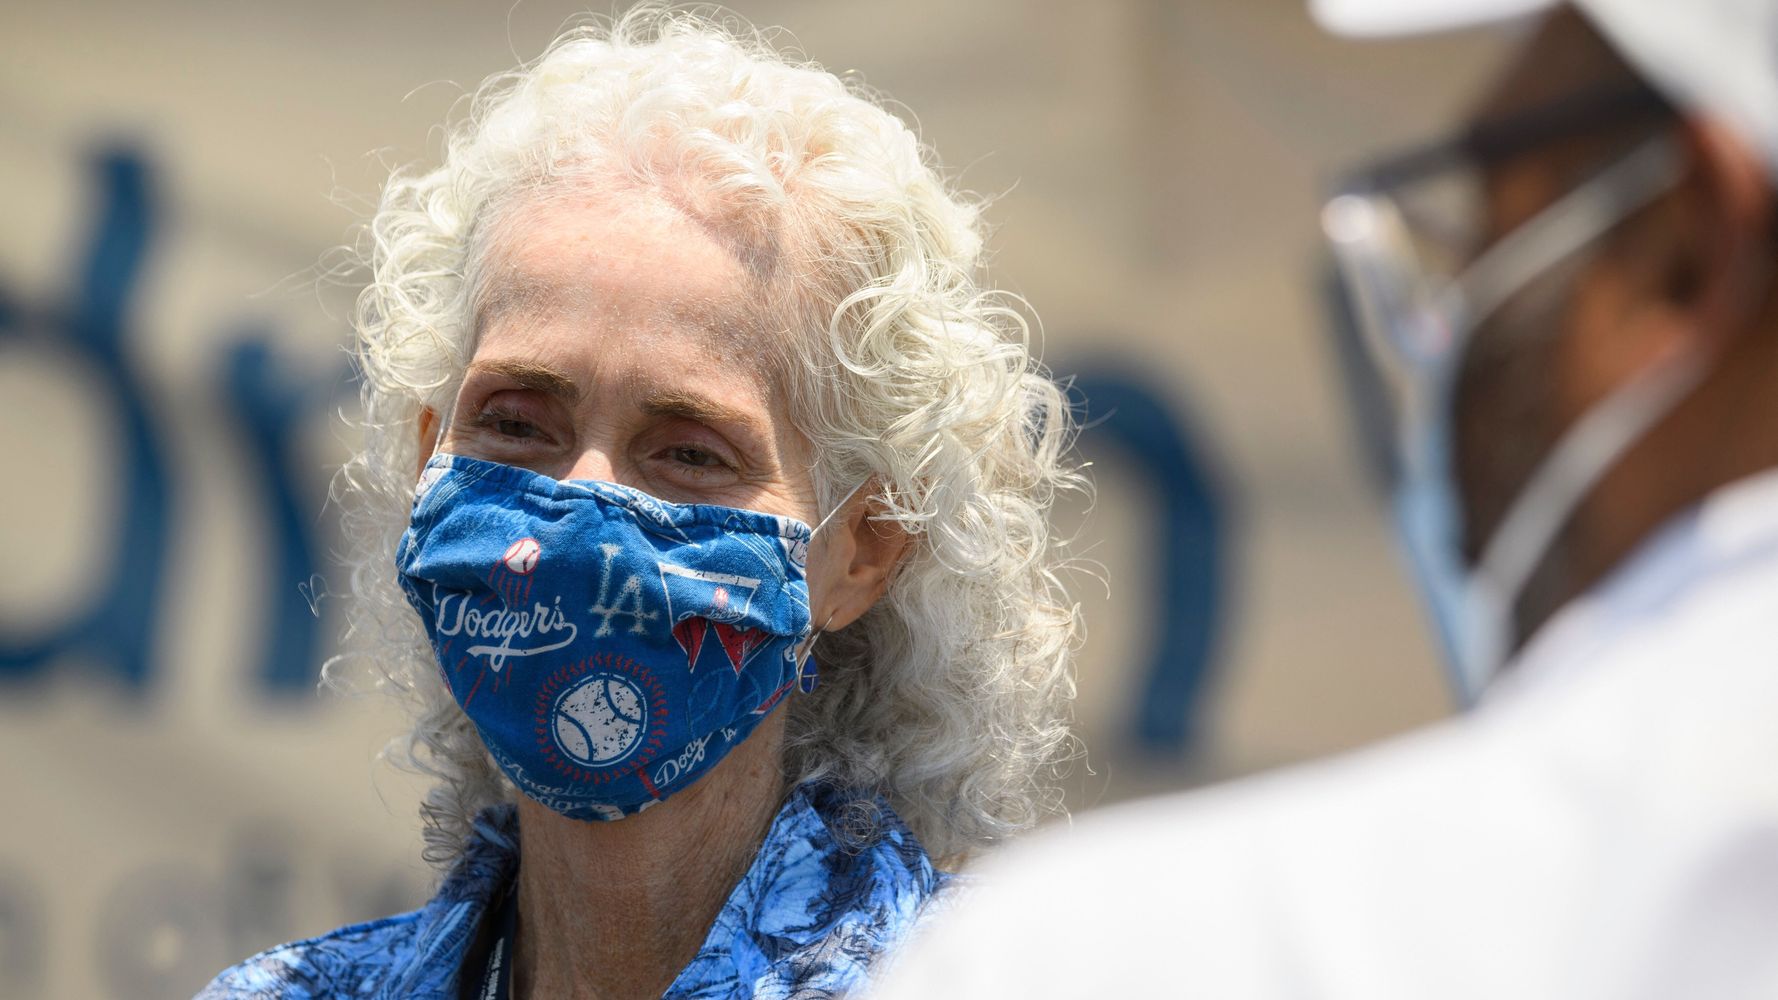 Citing Delta Variant, L.A. County Urges Residents To Wear Masks Inside Again